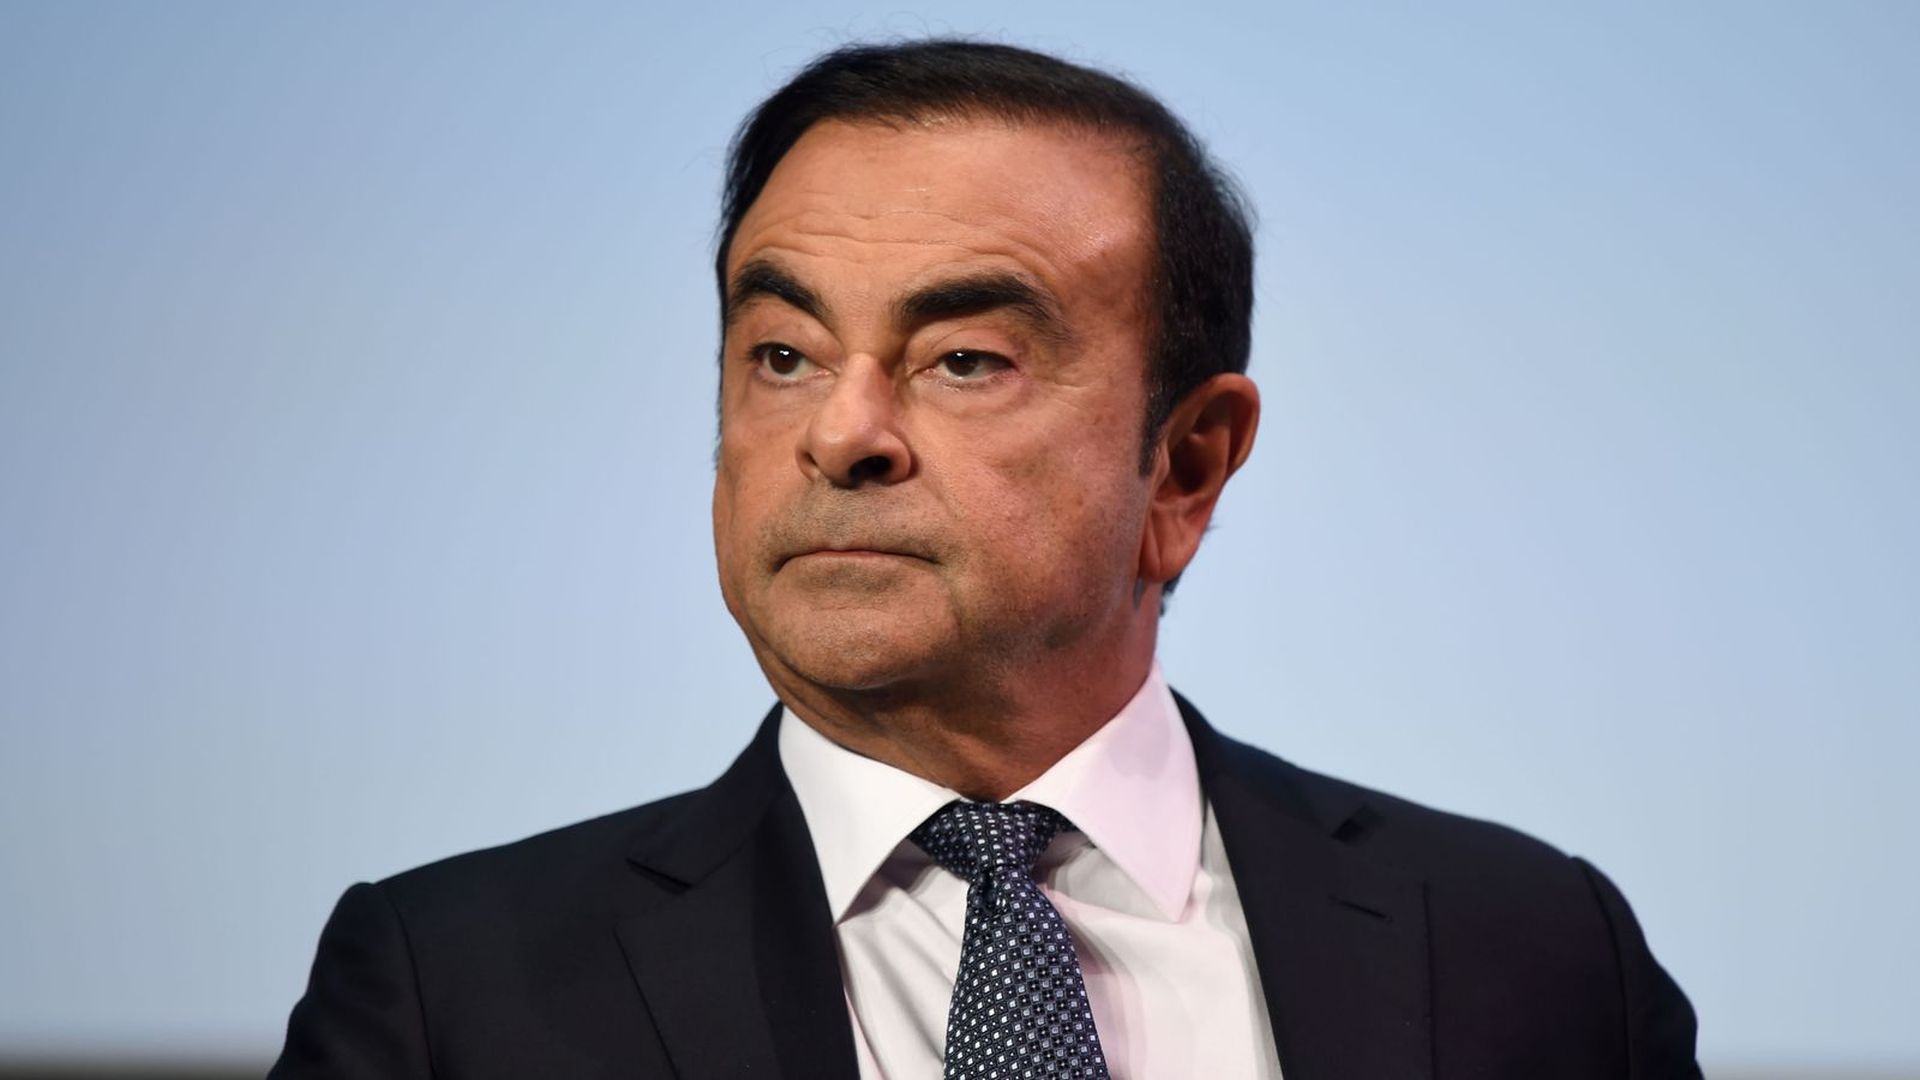 Former Nissan Motor Co boss Carlos Ghosn says he's innocent of all the charges against him.